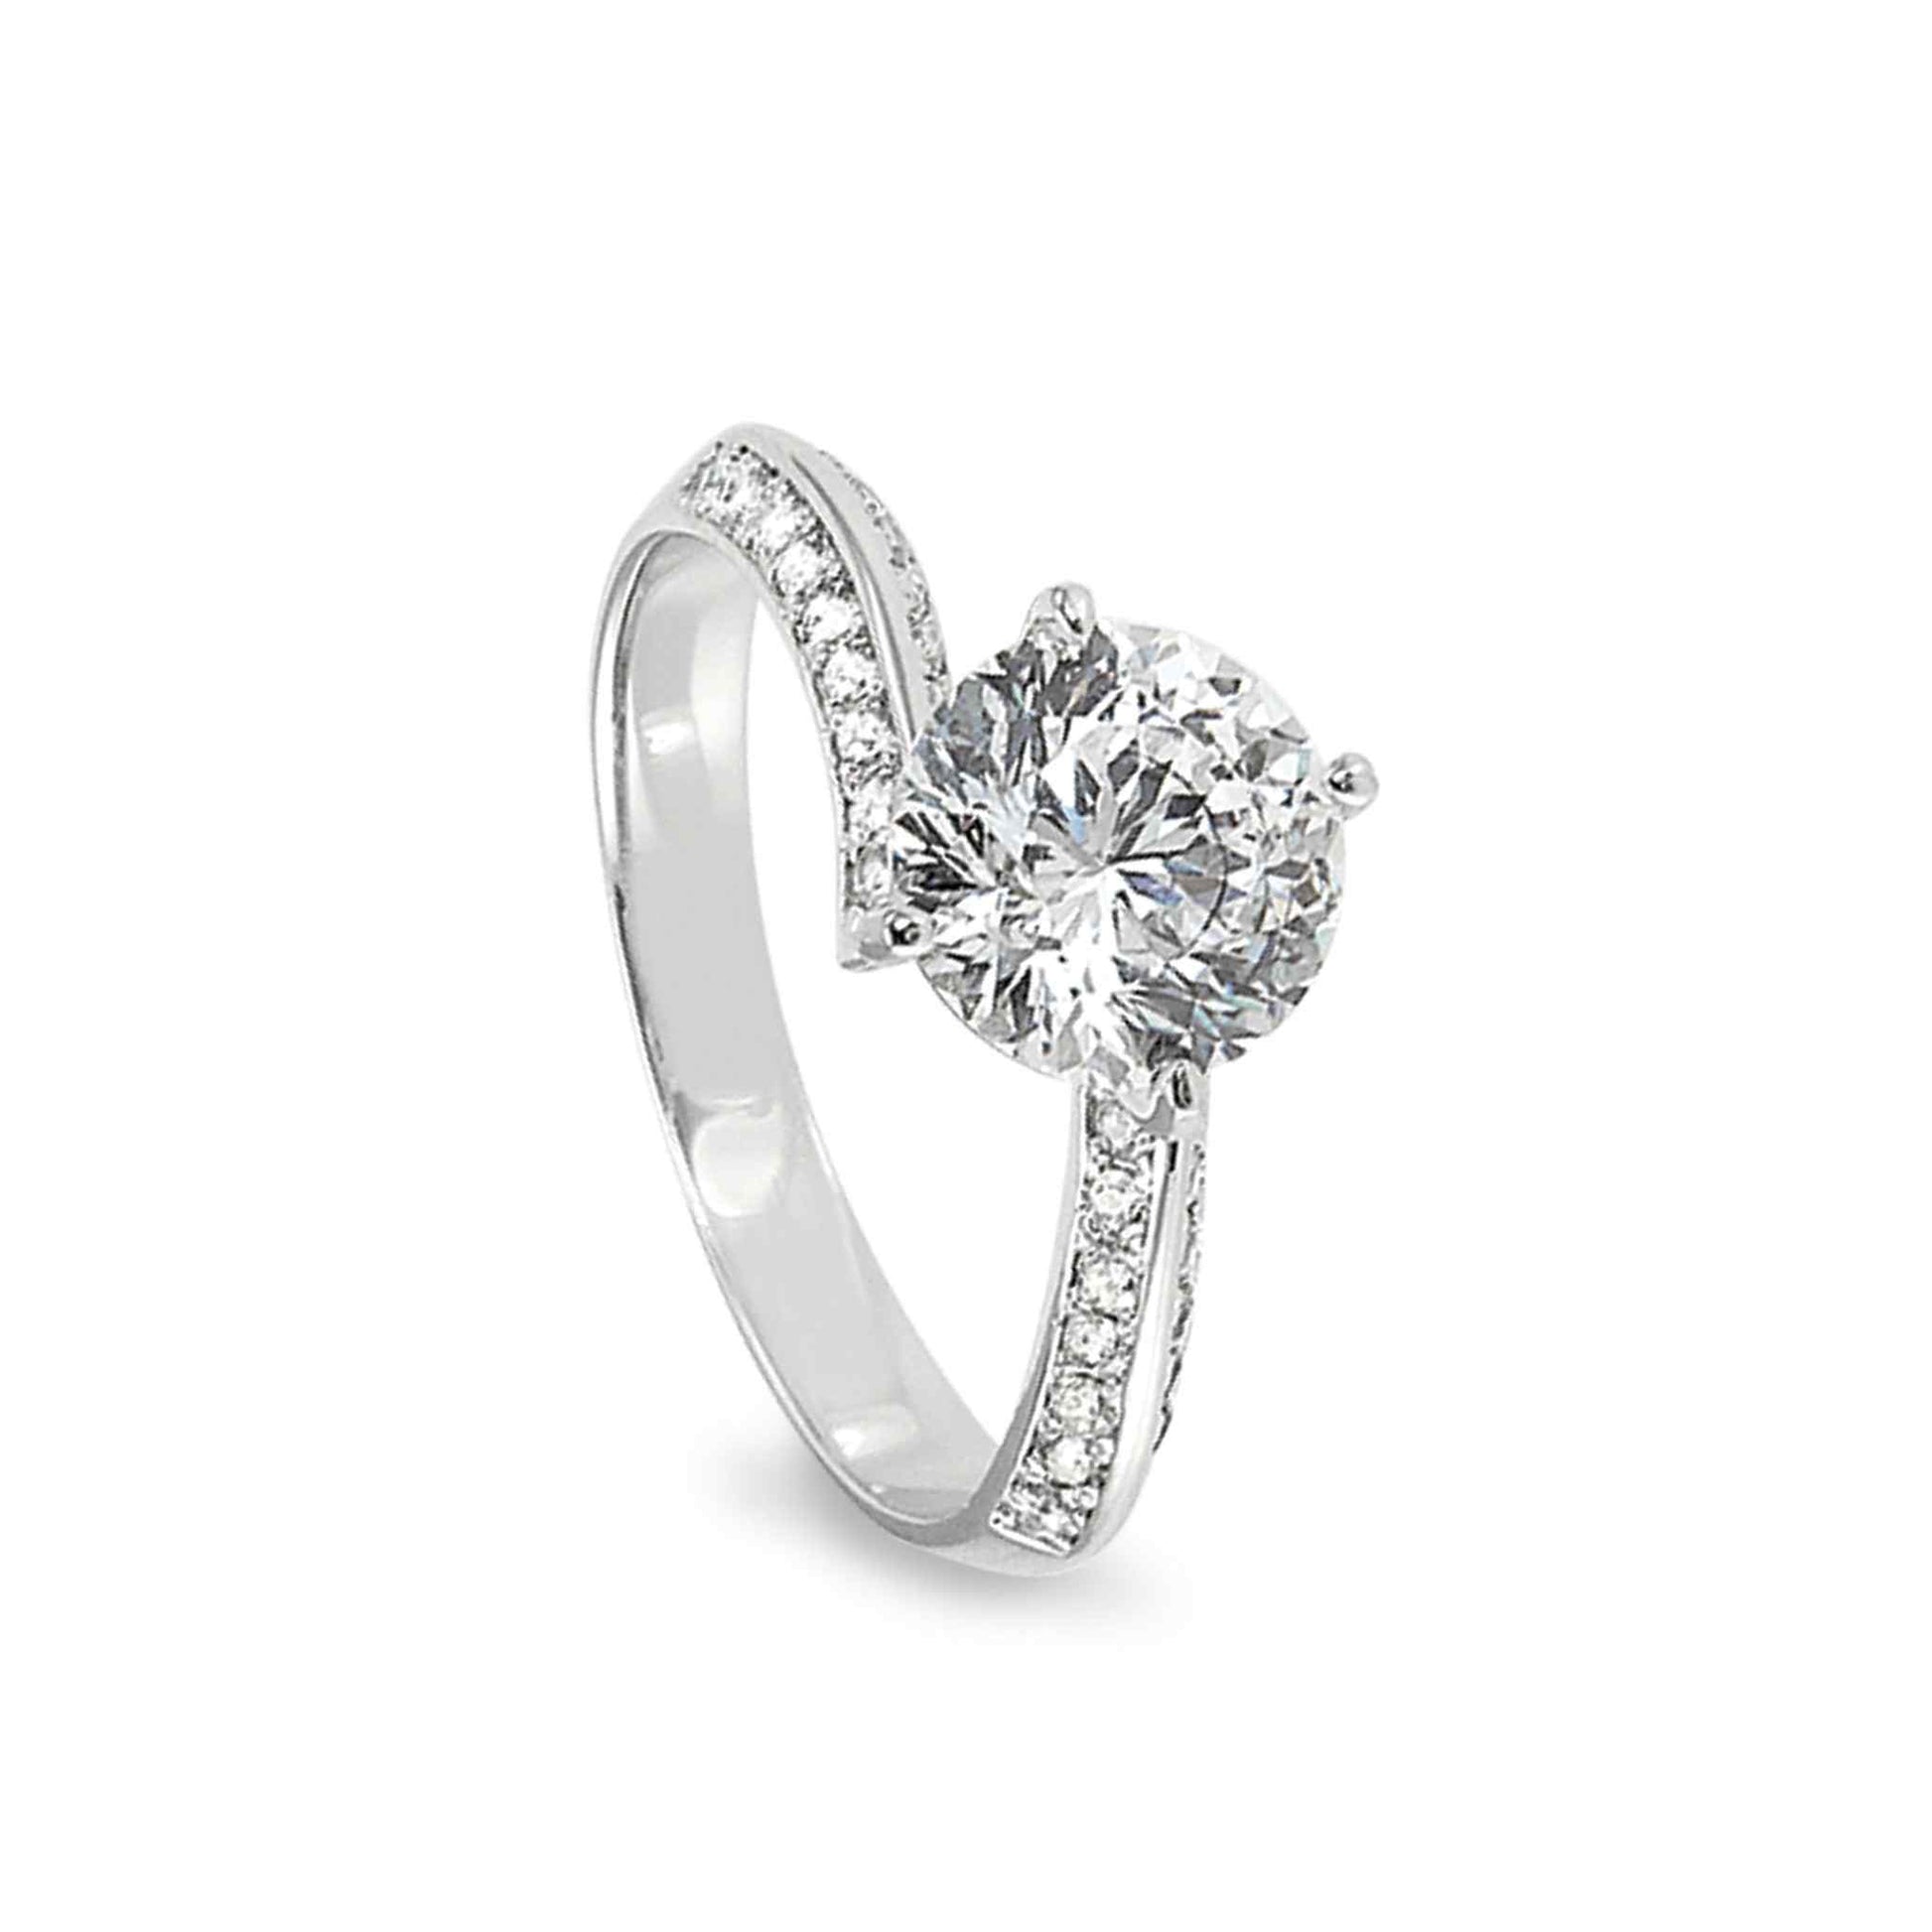 A twisted band engagement ring with 100 facet simulated diamond displayed on a neutral white background.